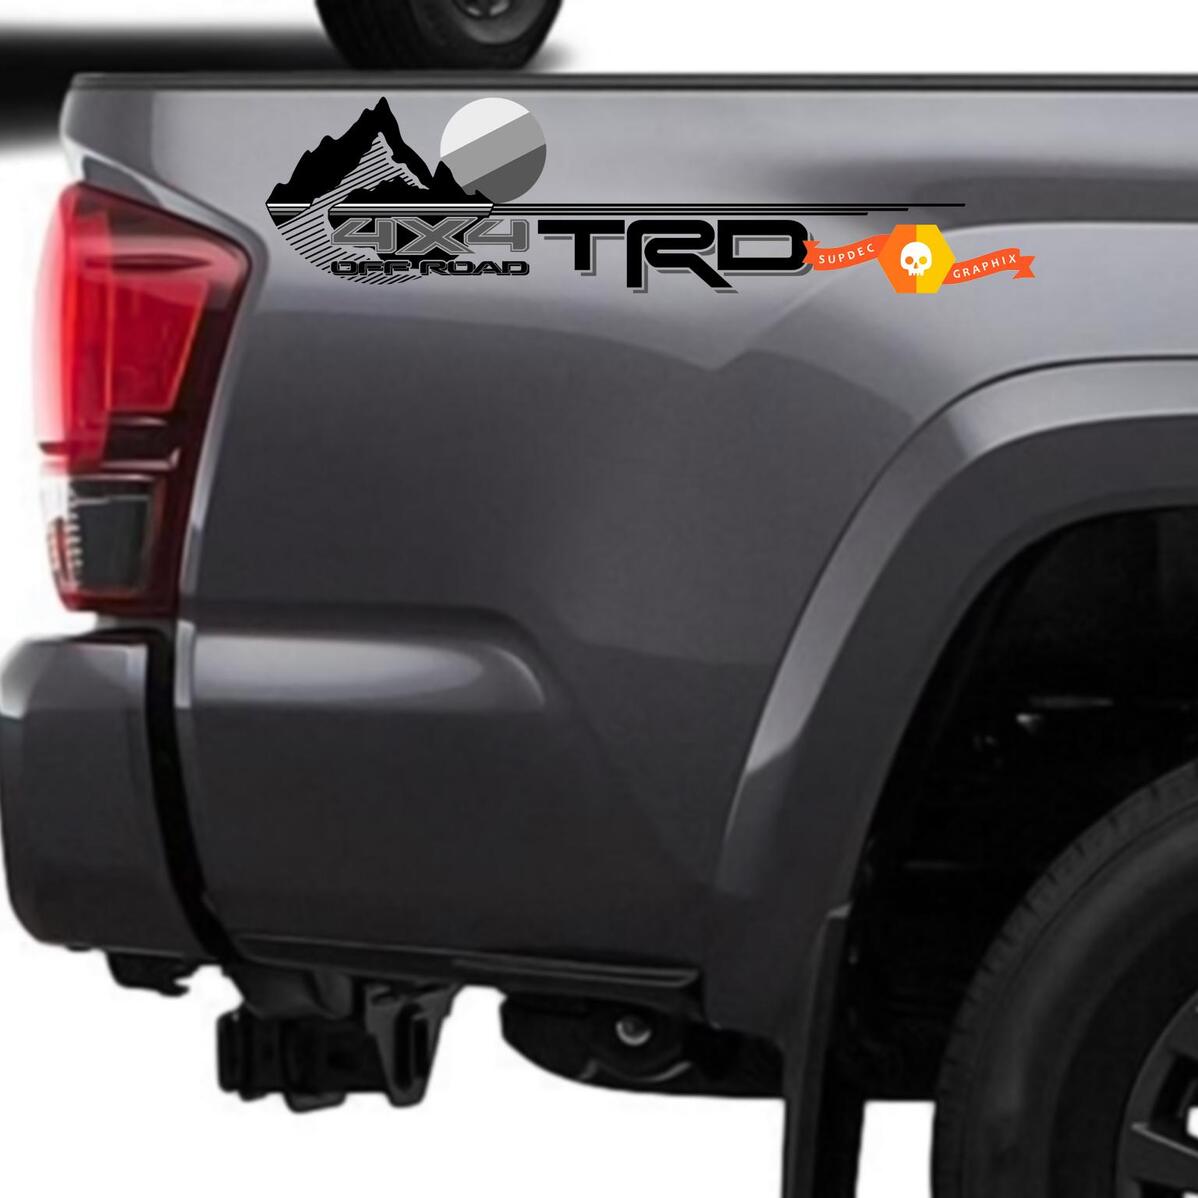 New TRD 4x4 Off road with Mountains Monochrome Grey Style Side Vinyl Stickers Decal fit to Tacoma Tundra 4Runner